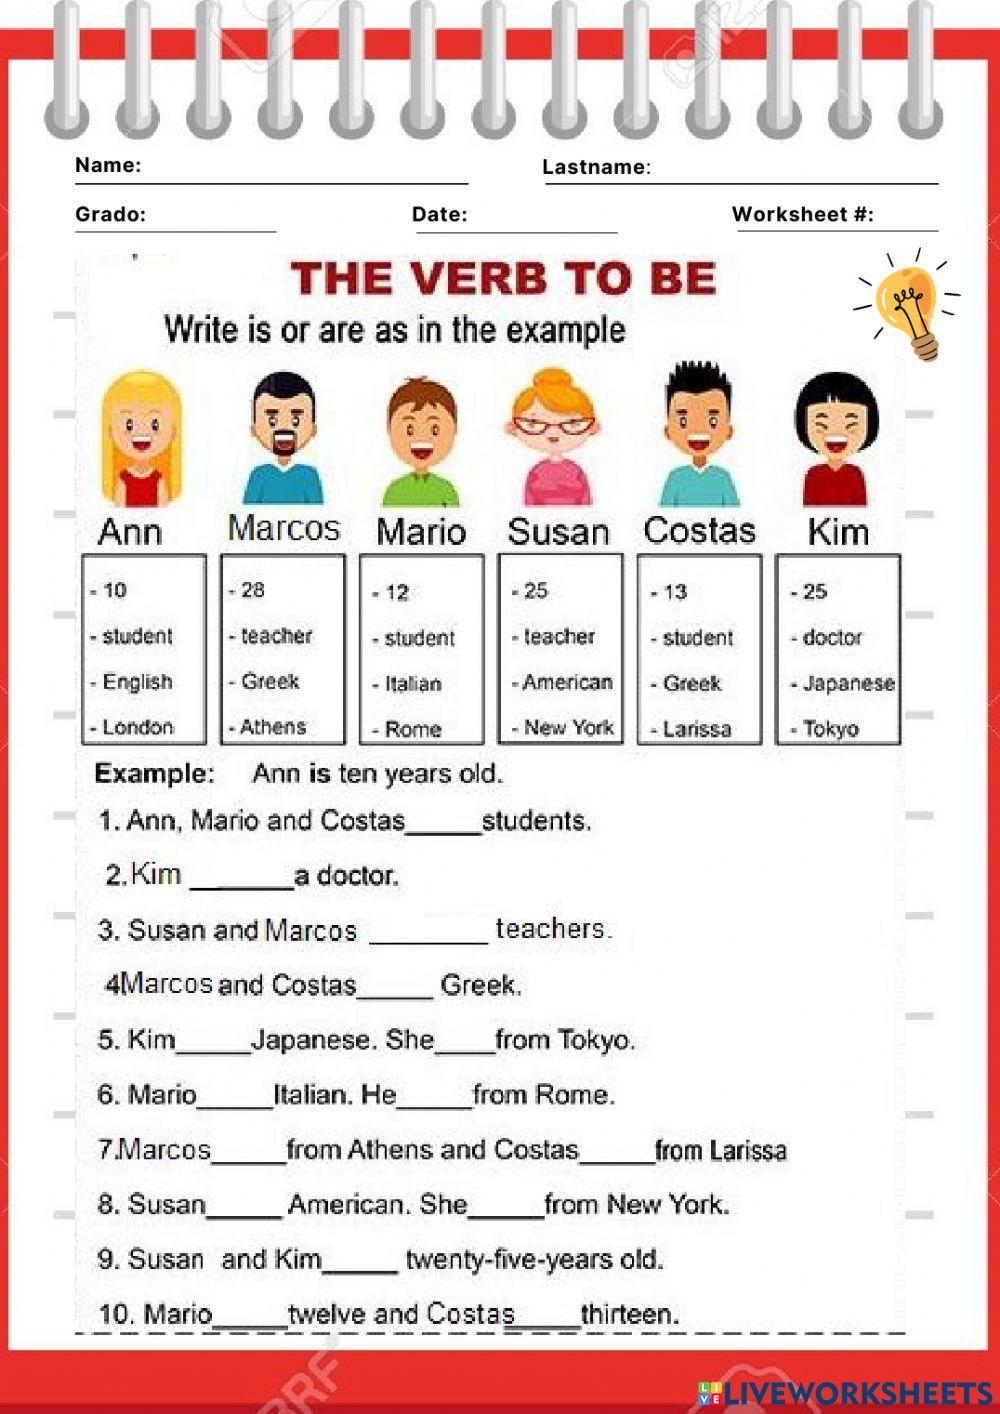 Verb to be - afirmative -Practica